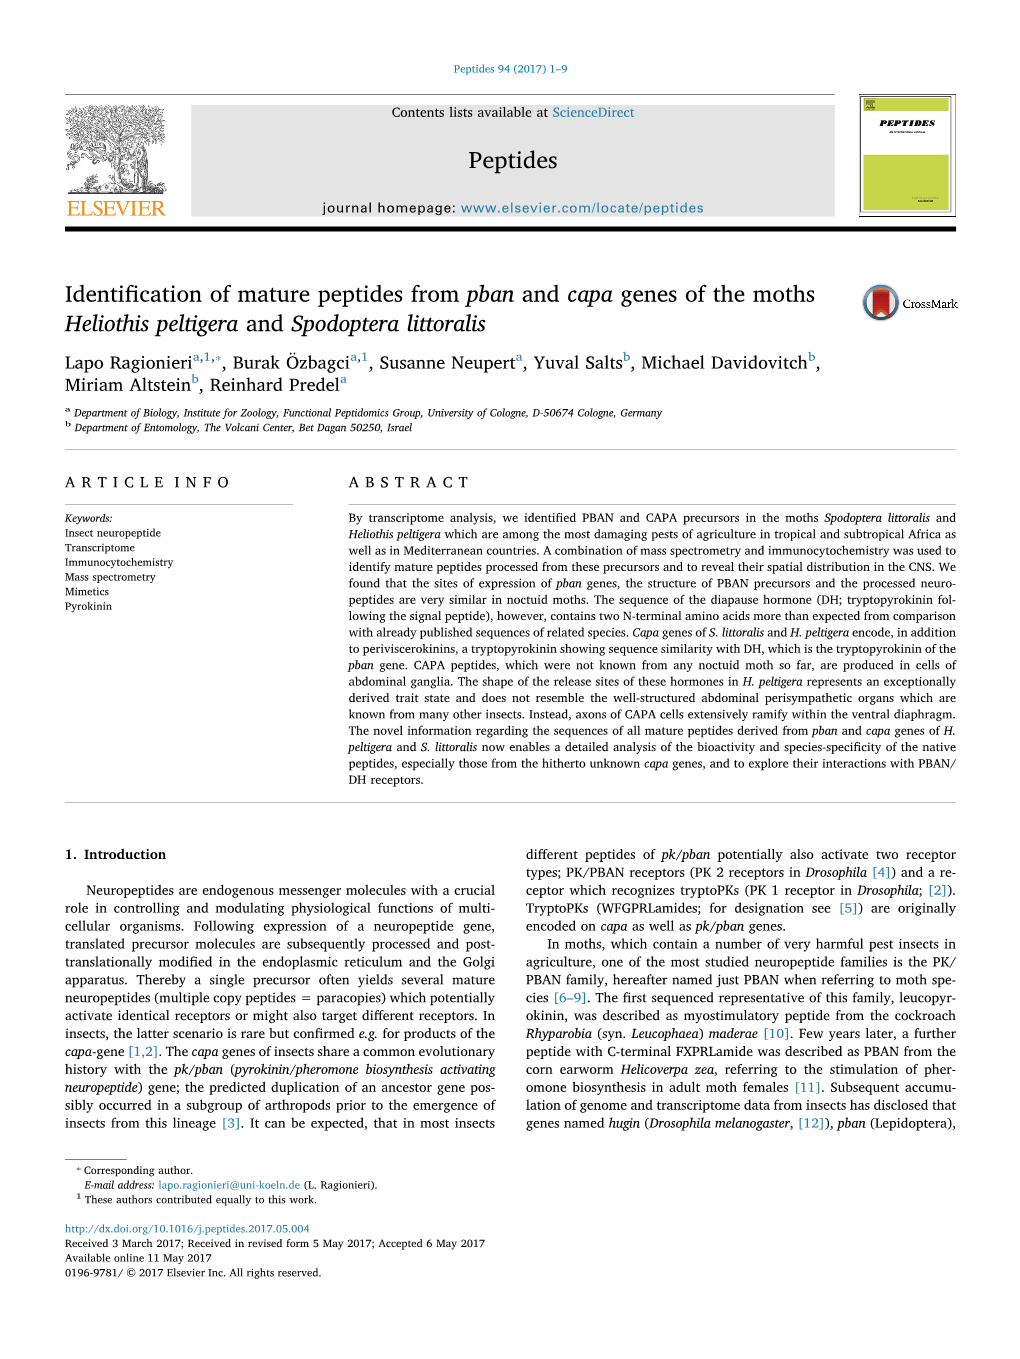 Identification of Mature Peptides from Pban and Capa Genes of the Moths